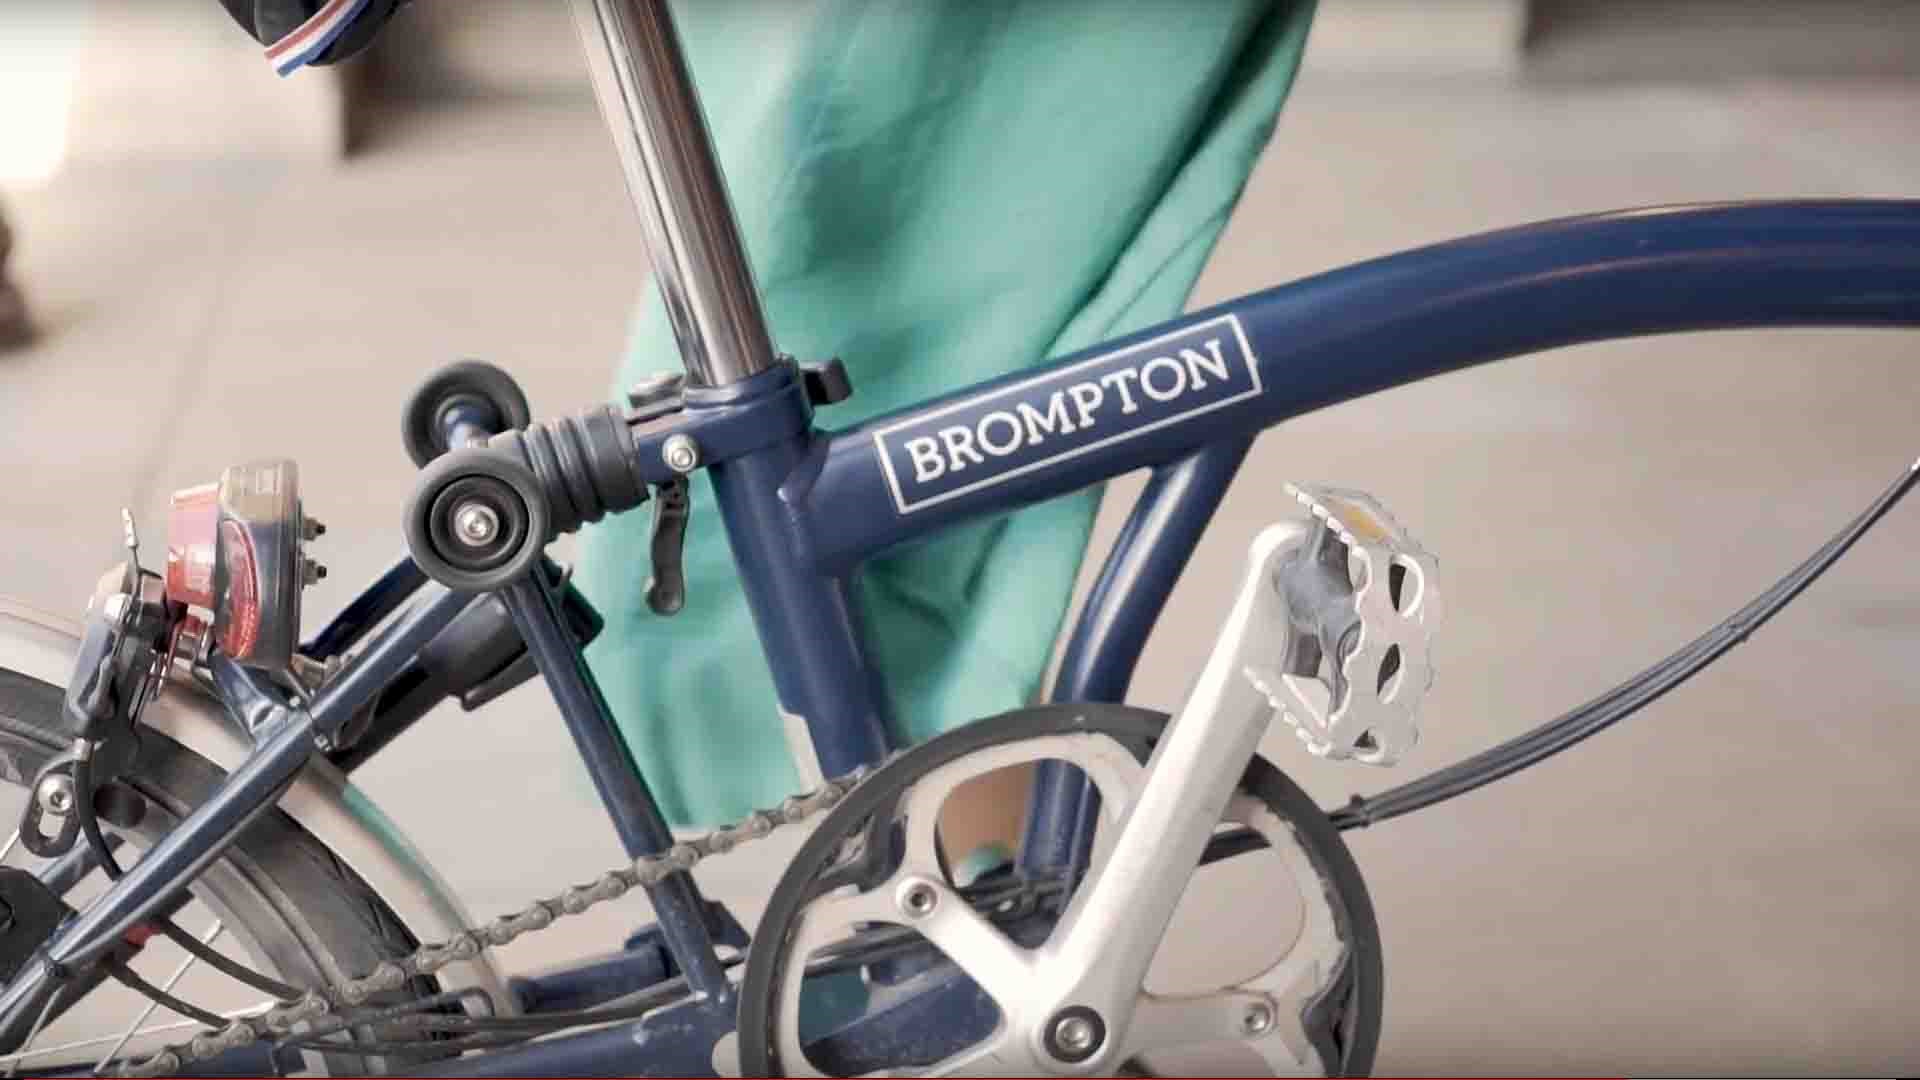 Brompton Bicycle: Made For Cities